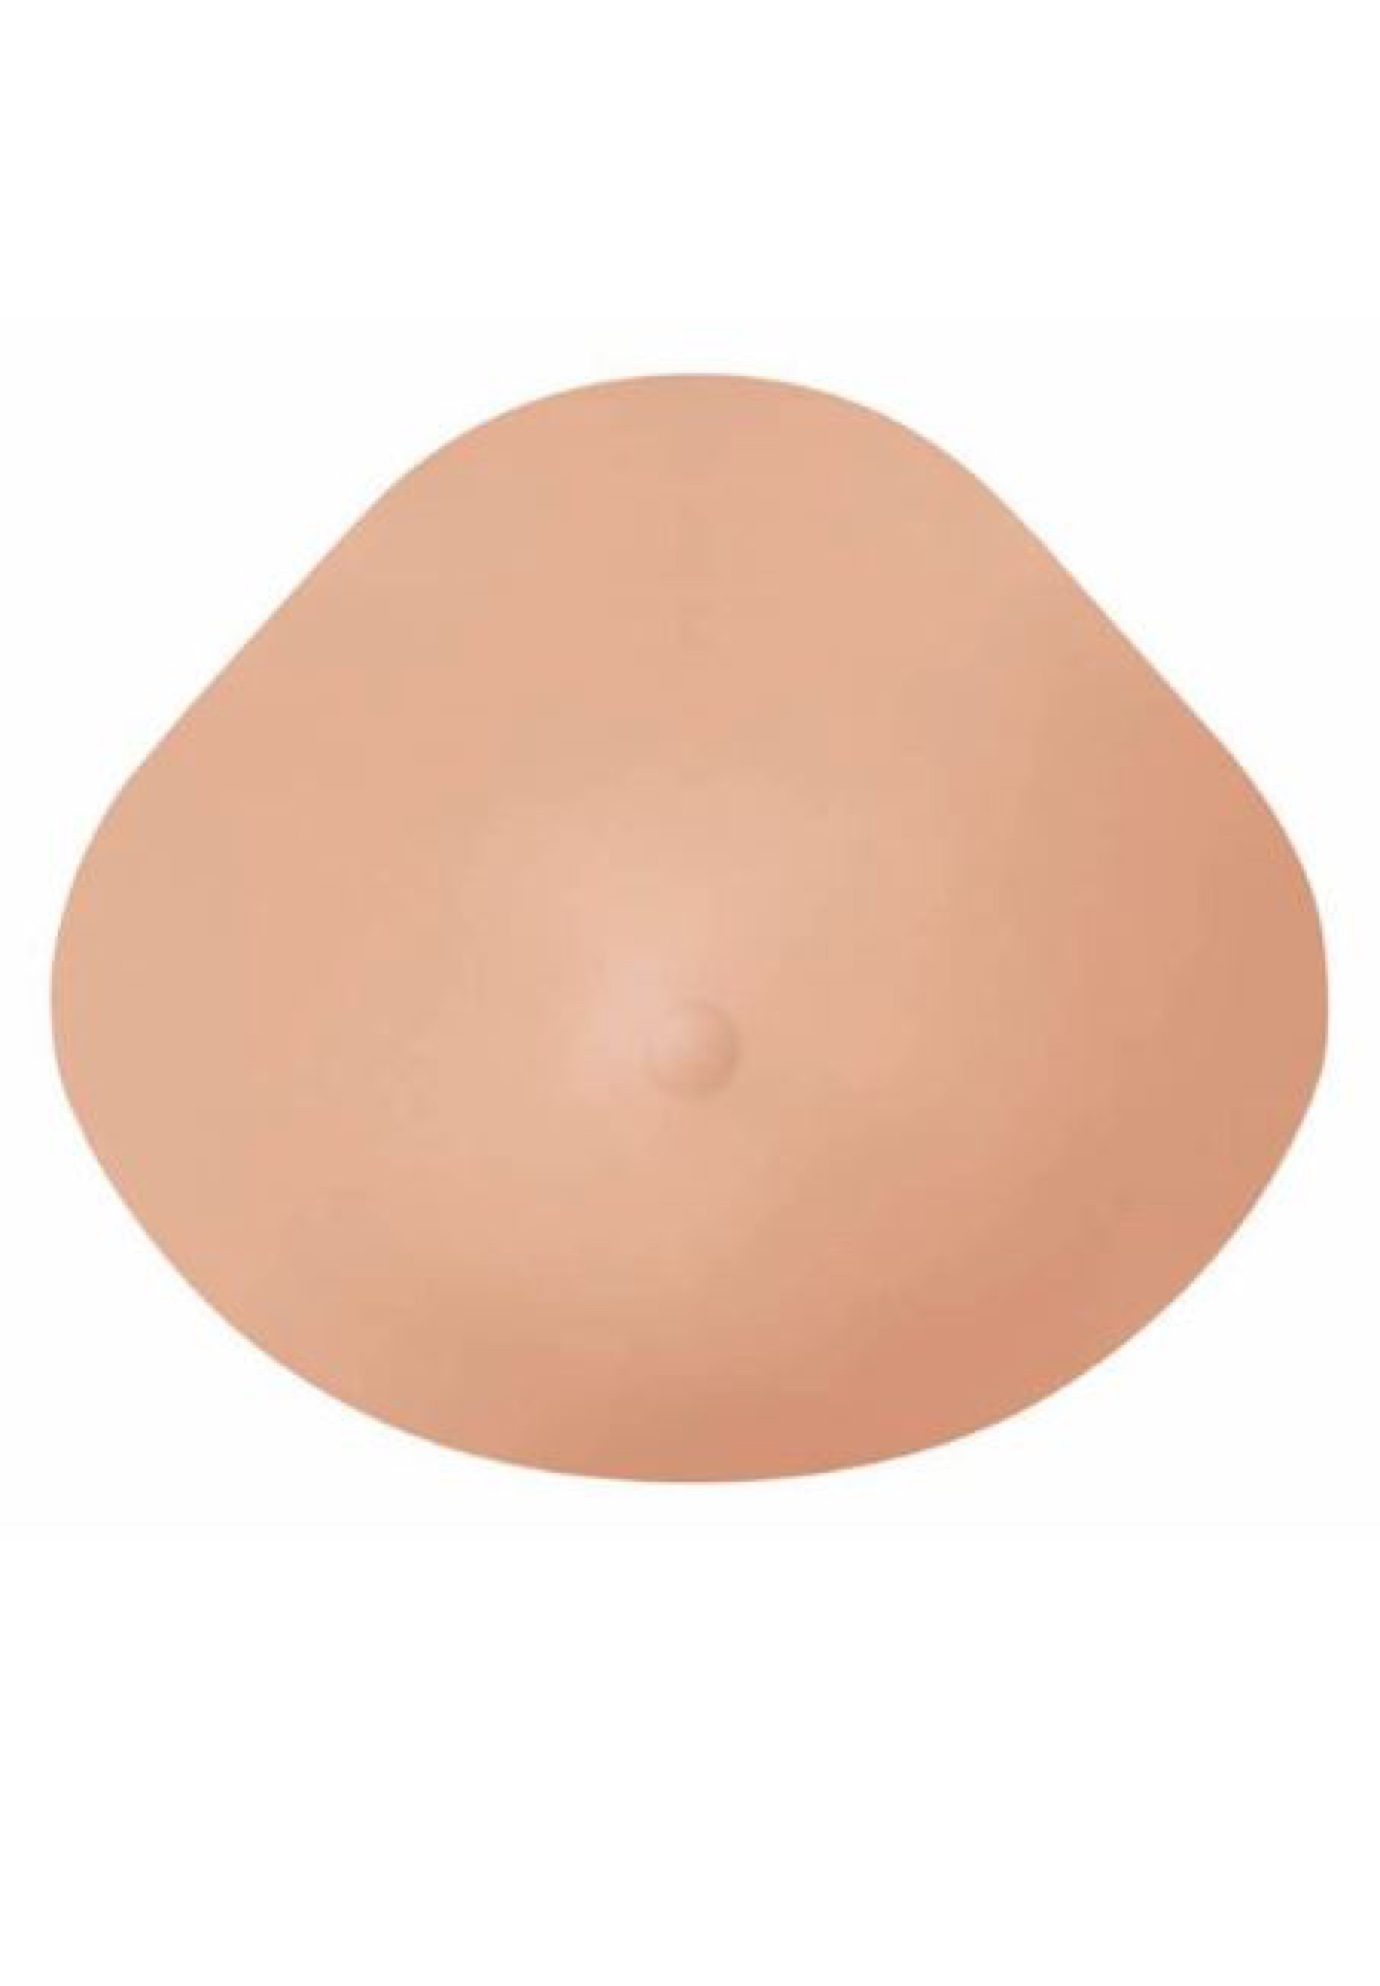 How To Make Fake Breast Forms